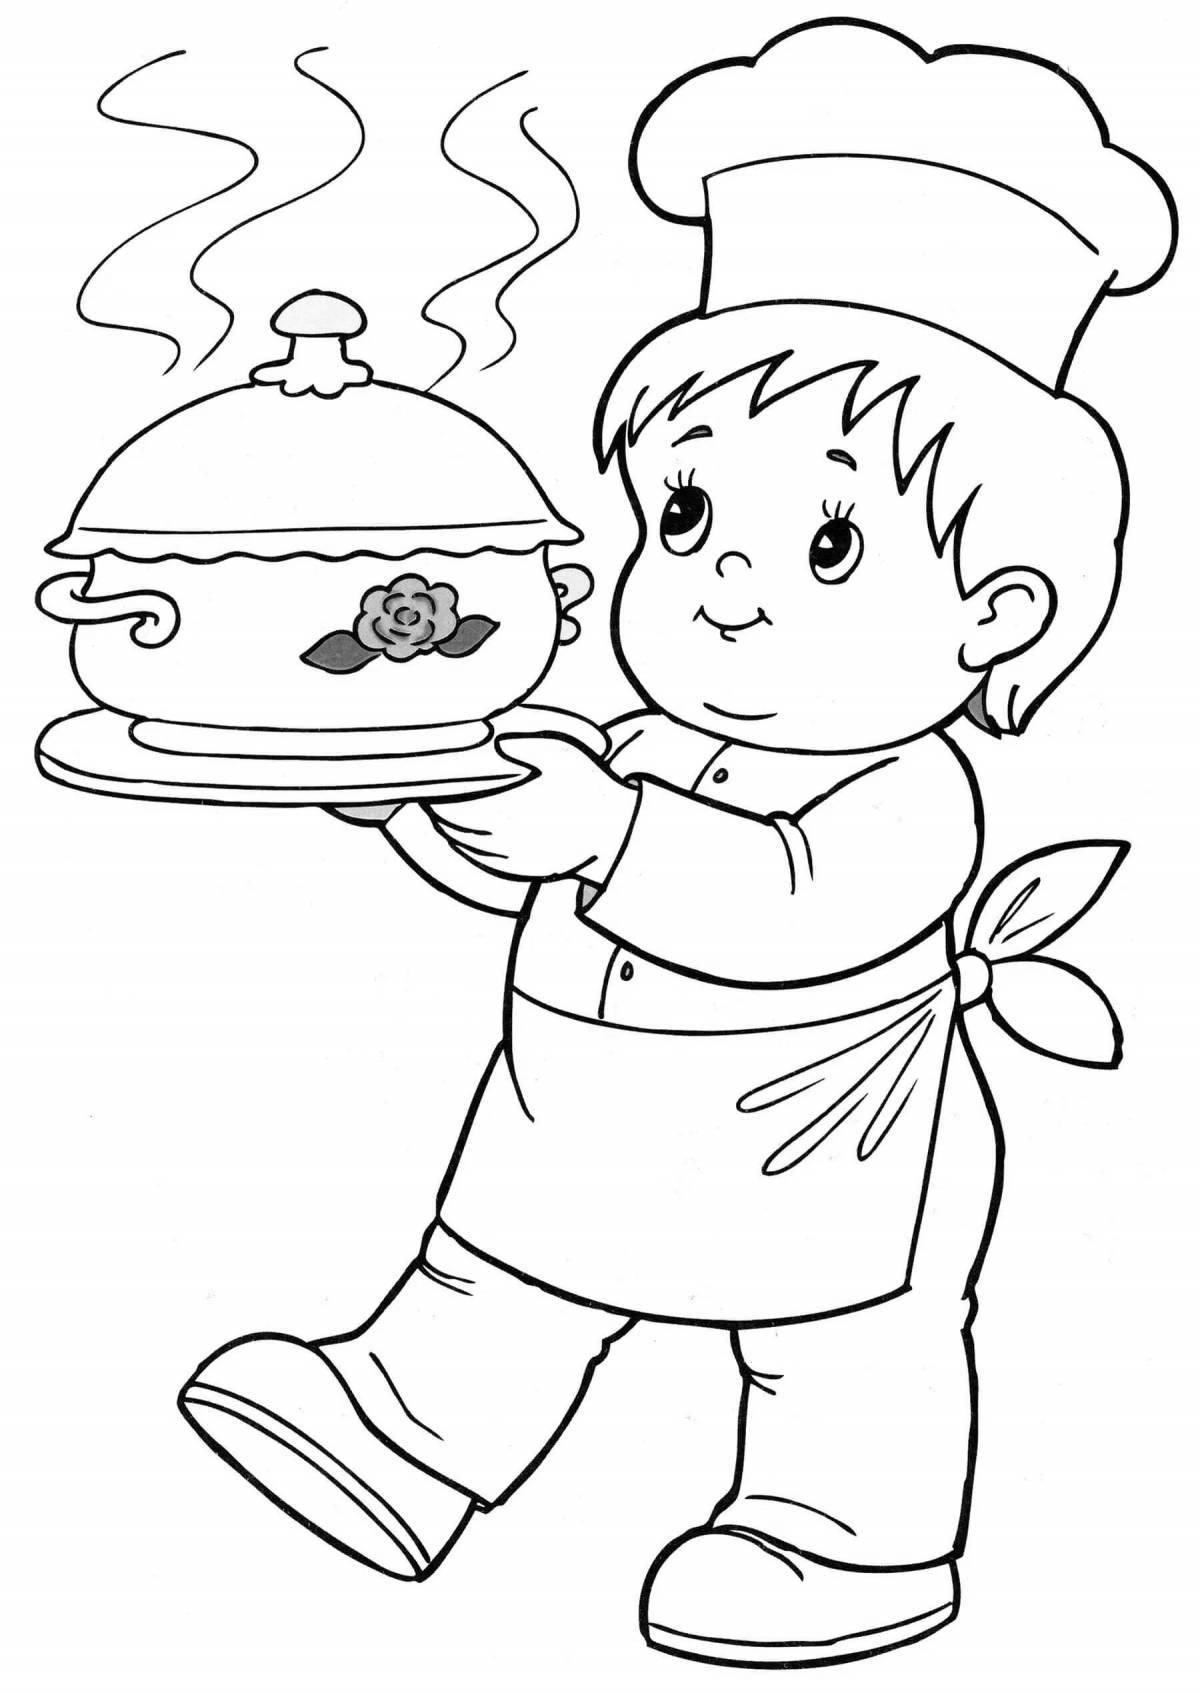 Colour coloring of the cook for kindergarten